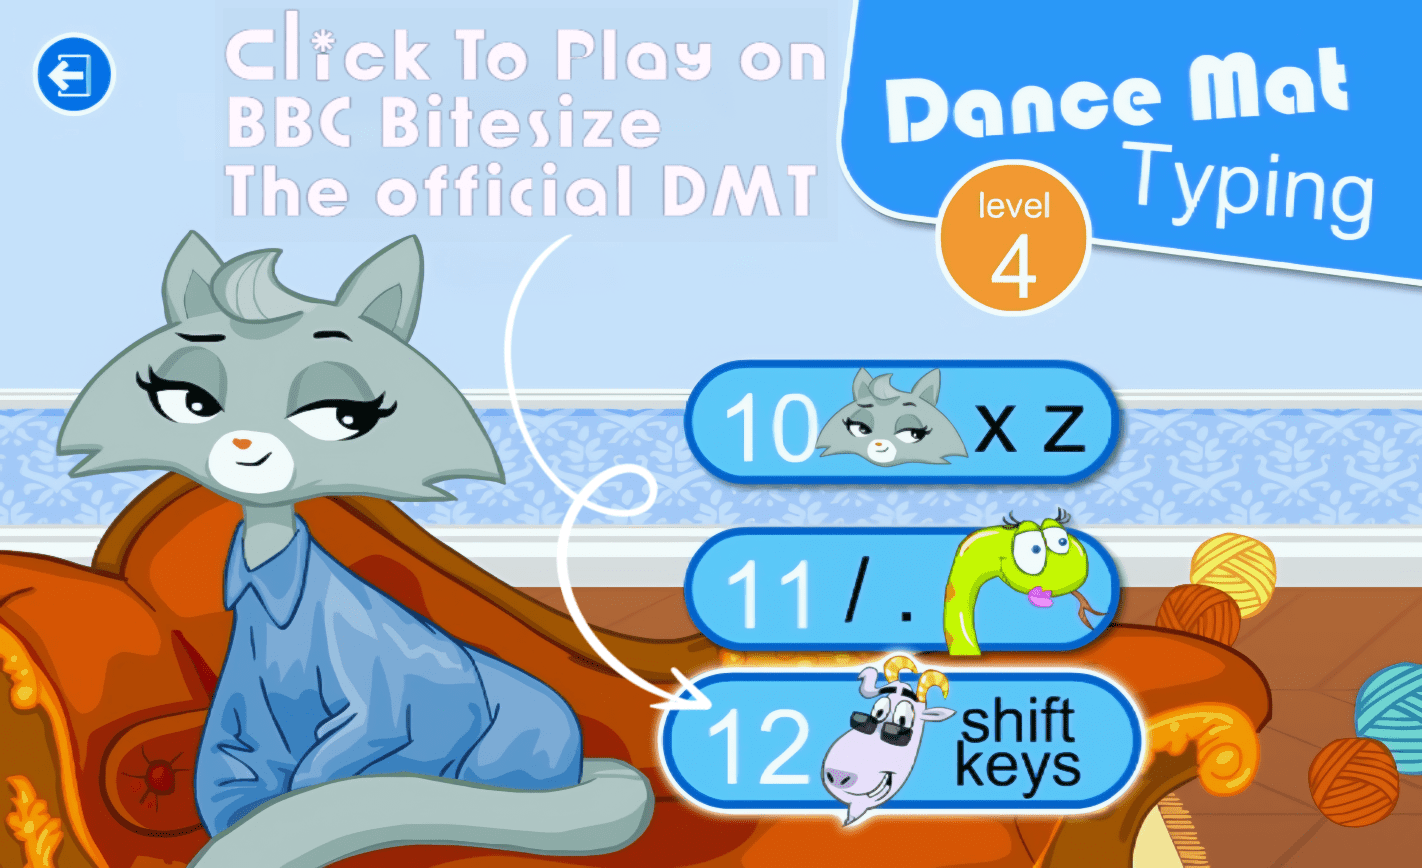 DANCE MAT TYPING BBC LEVEL 1 TO 5